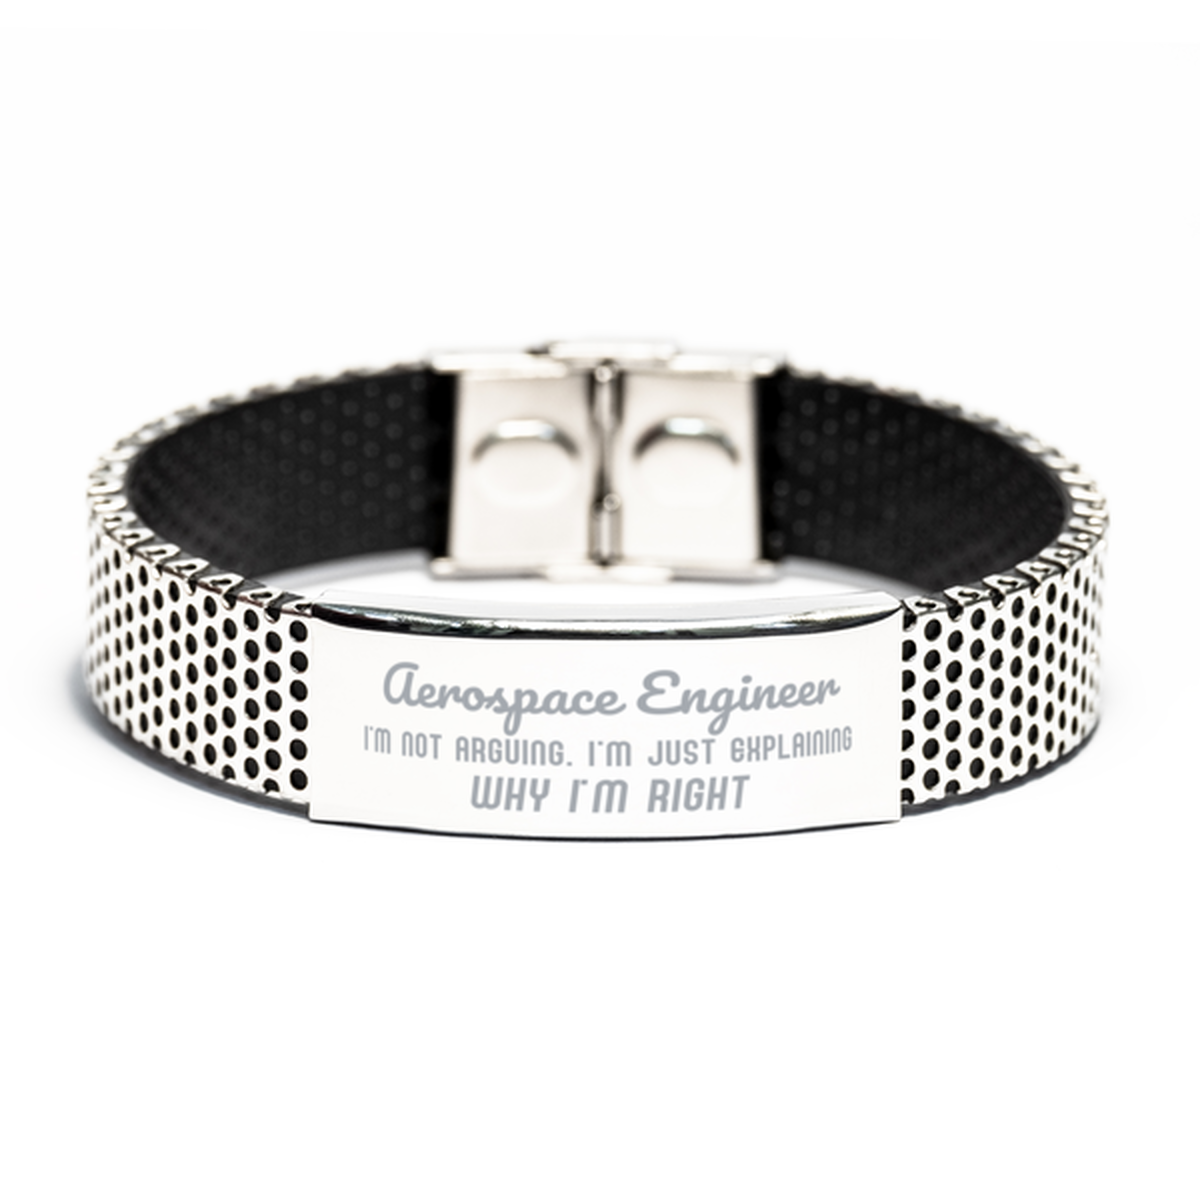 Aerospace Engineer I'm not Arguing. I'm Just Explaining Why I'm RIGHT Stainless Steel Bracelet, Funny Saying Quote Aerospace Engineer Gifts For Aerospace Engineer Graduation Birthday Christmas Gifts for Men Women Coworker